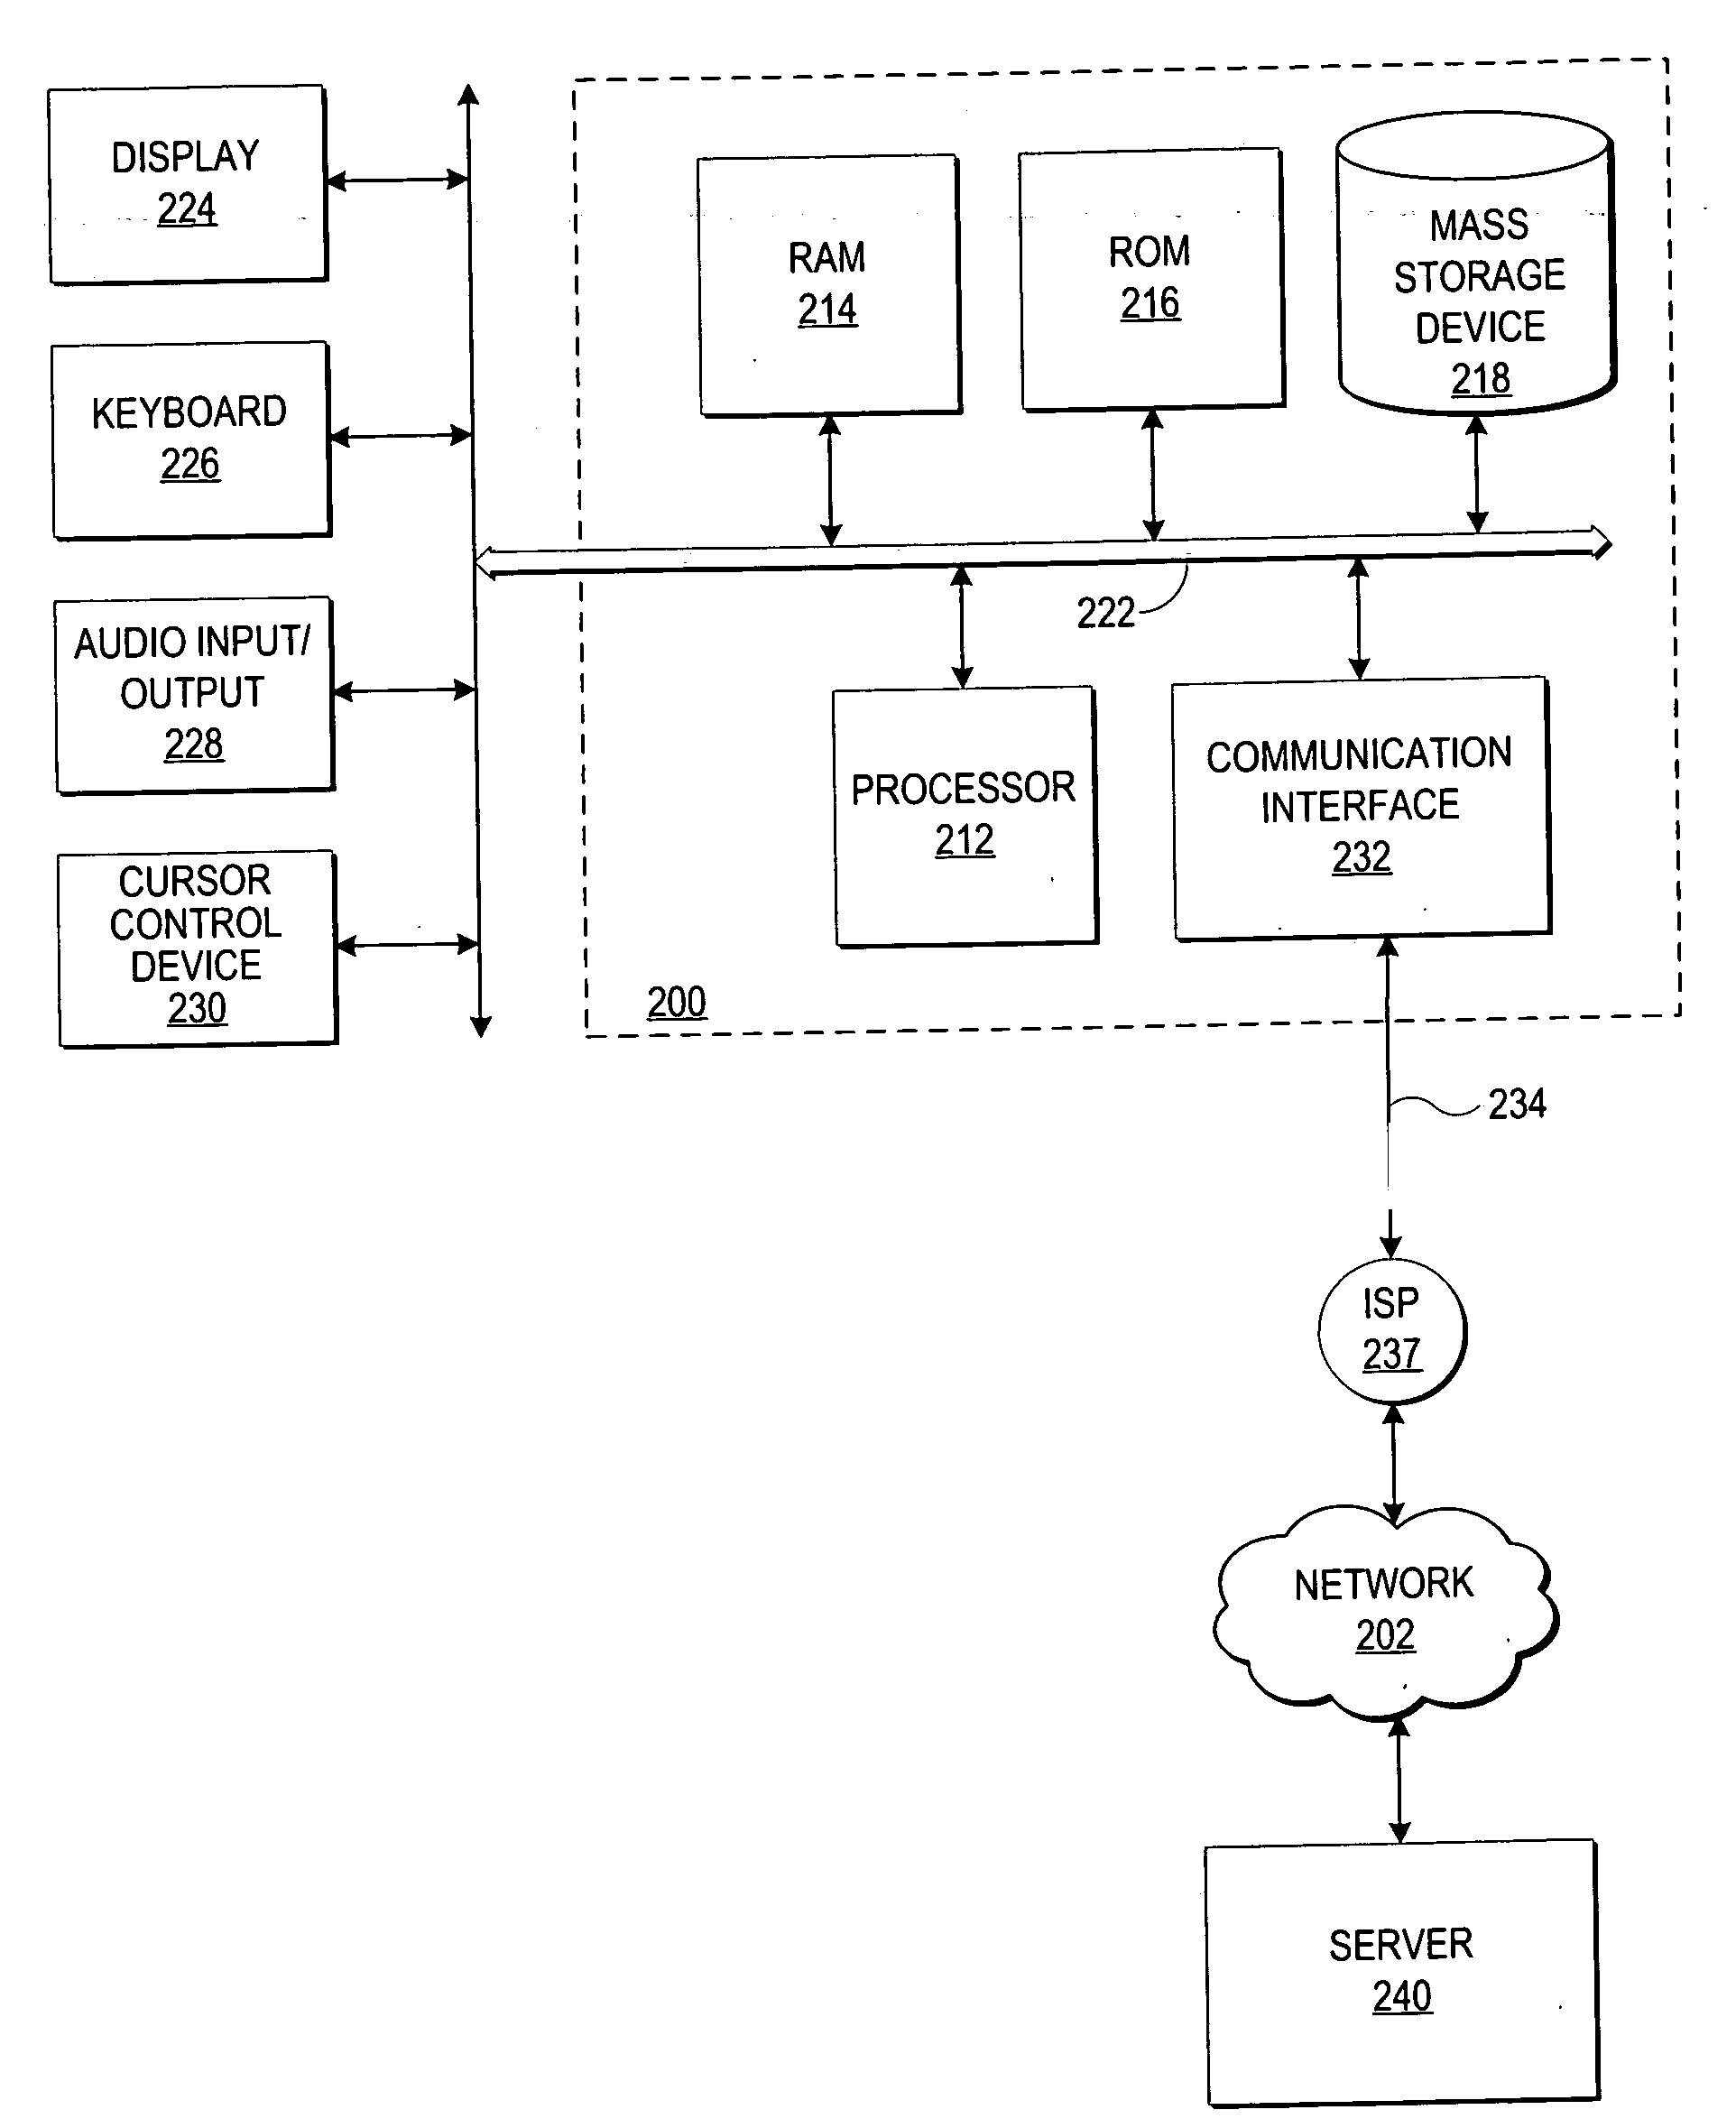 Security screening of electronic devices by device identifier